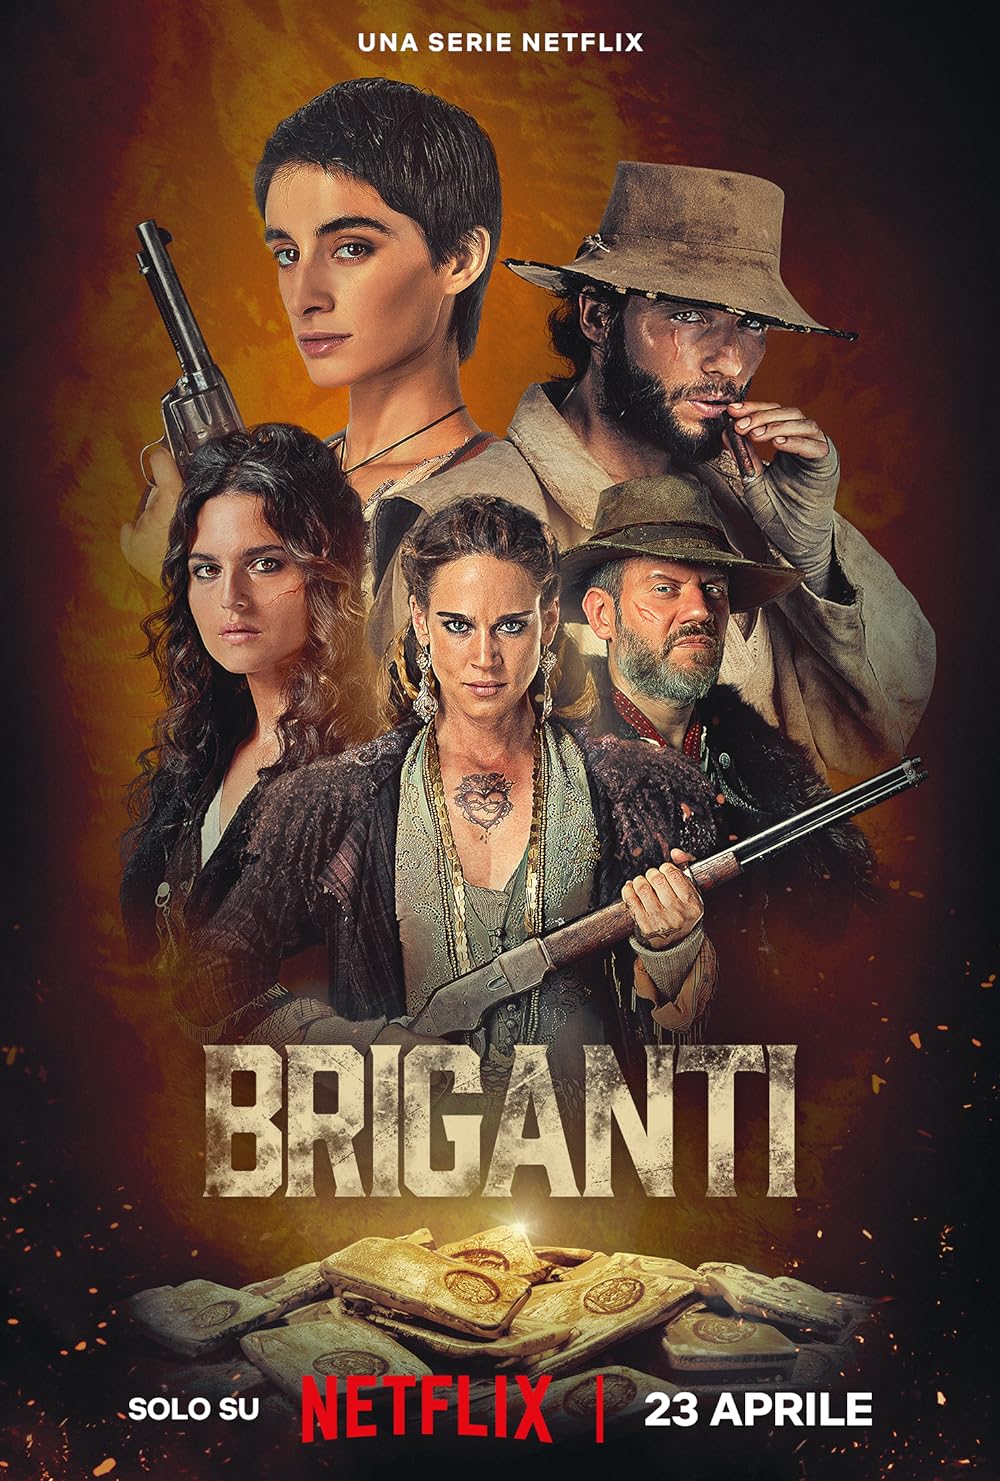 Briganti (April 23, Netflix)Prepare to journey into the chaotic world of Southern Italy in the mid-19th century with 